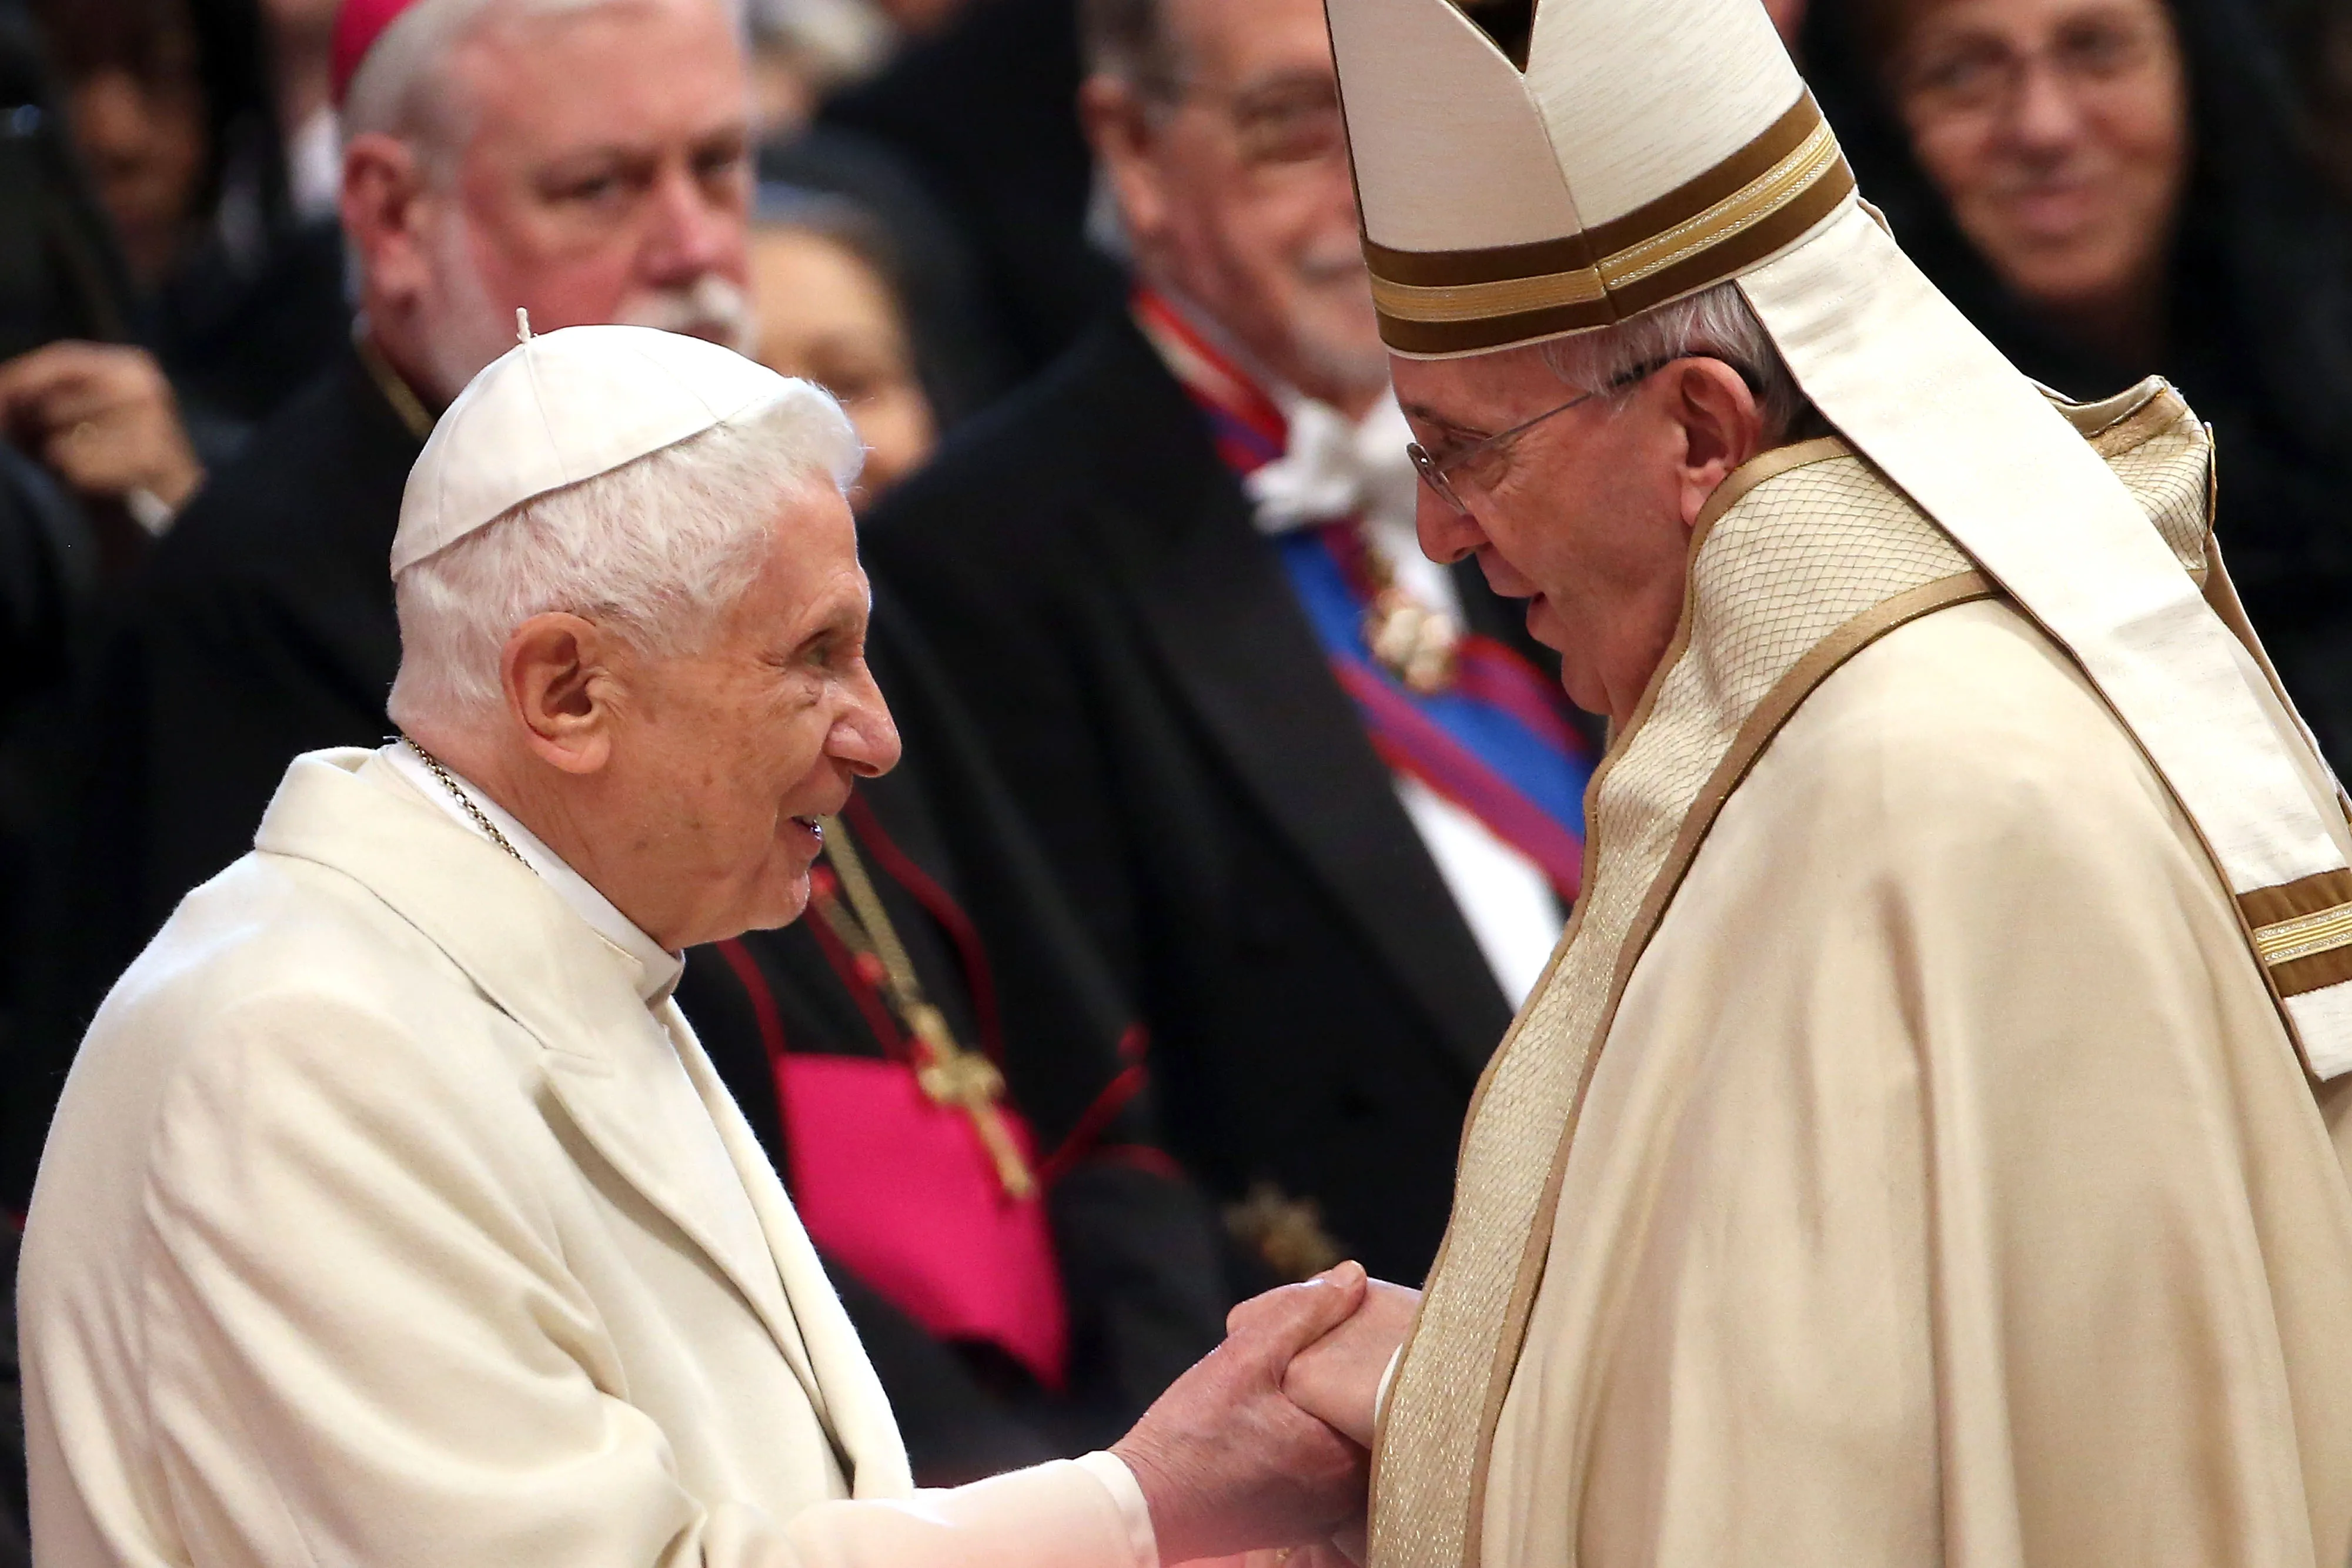 Pope Emeritus Benedict XVI is greeted by Pope Francis during the Ordinary Public Consistory at St. Peter’s Basilica on Feb. 14, 2015.?w=200&h=150